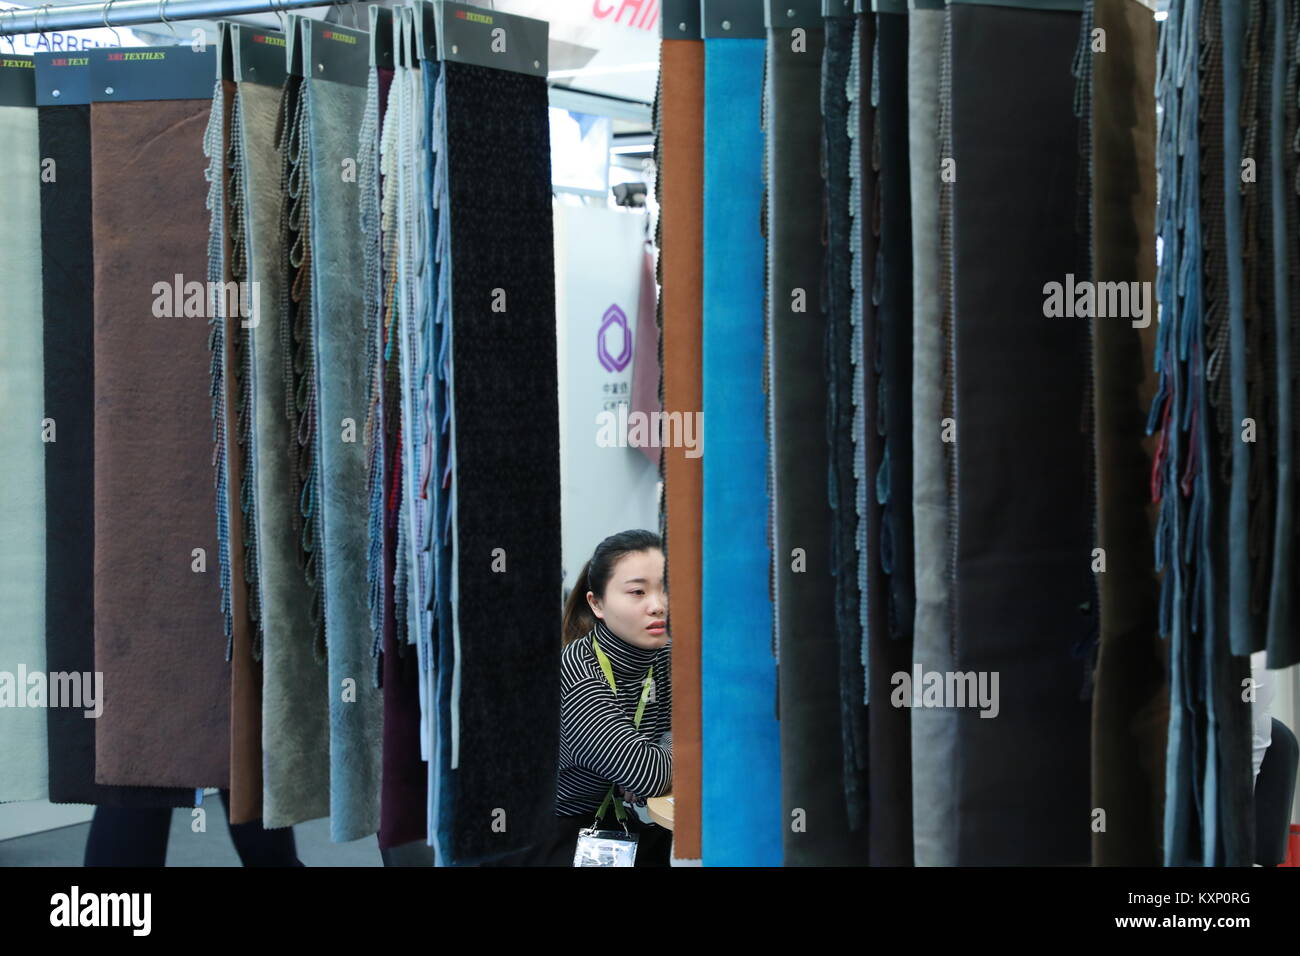 Frankfurt, Germany. 11th Jan, 2018. A worker sits at a Chinese textile booth at Heimtextil, the world's largest international trade fair for home and contract textiles, in Frankfurt, Germany, on Jan. 11, 2018. A total of 2,975 exhibitors from 64 countries and regions attended the trade fair this year, 545 of which are from China. Credit: Luo Huanhuan/Xinhua/Alamy Live News Stock Photo